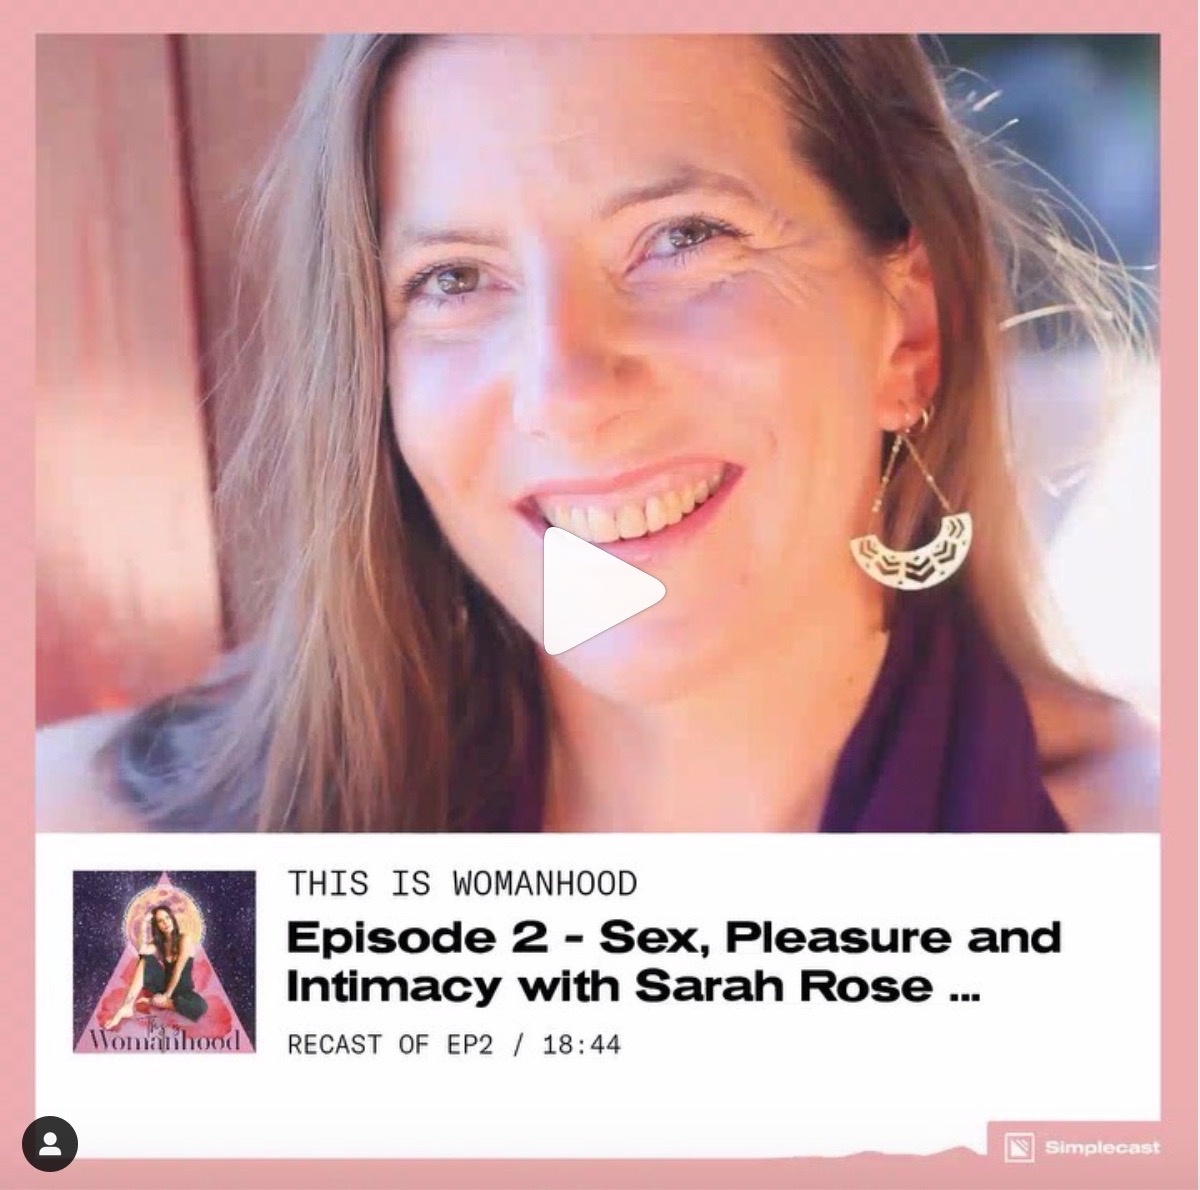 Sex, Pleasure and Intimacy – This is Womanhood Podcast